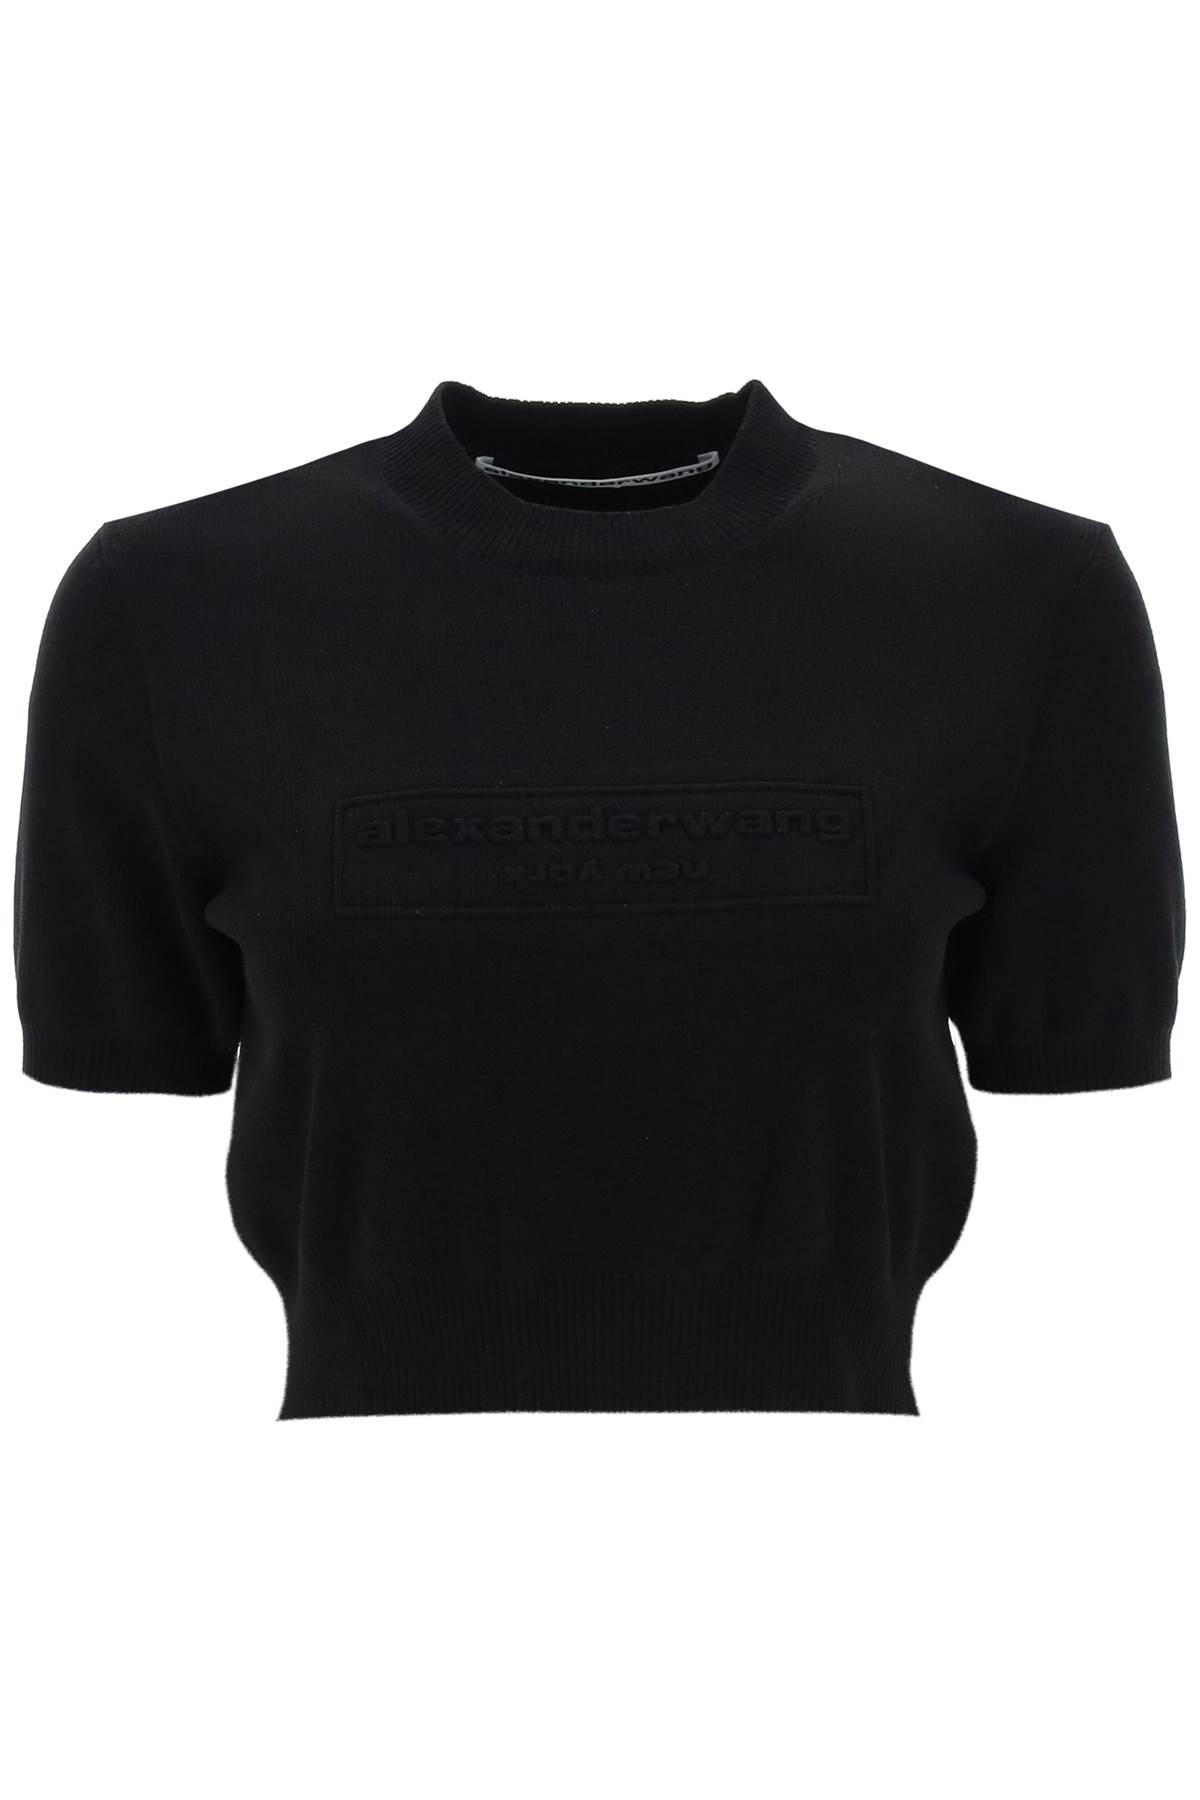 ALEXANDER WANG CROPPED TOP WITH EMBOSSED LOGO